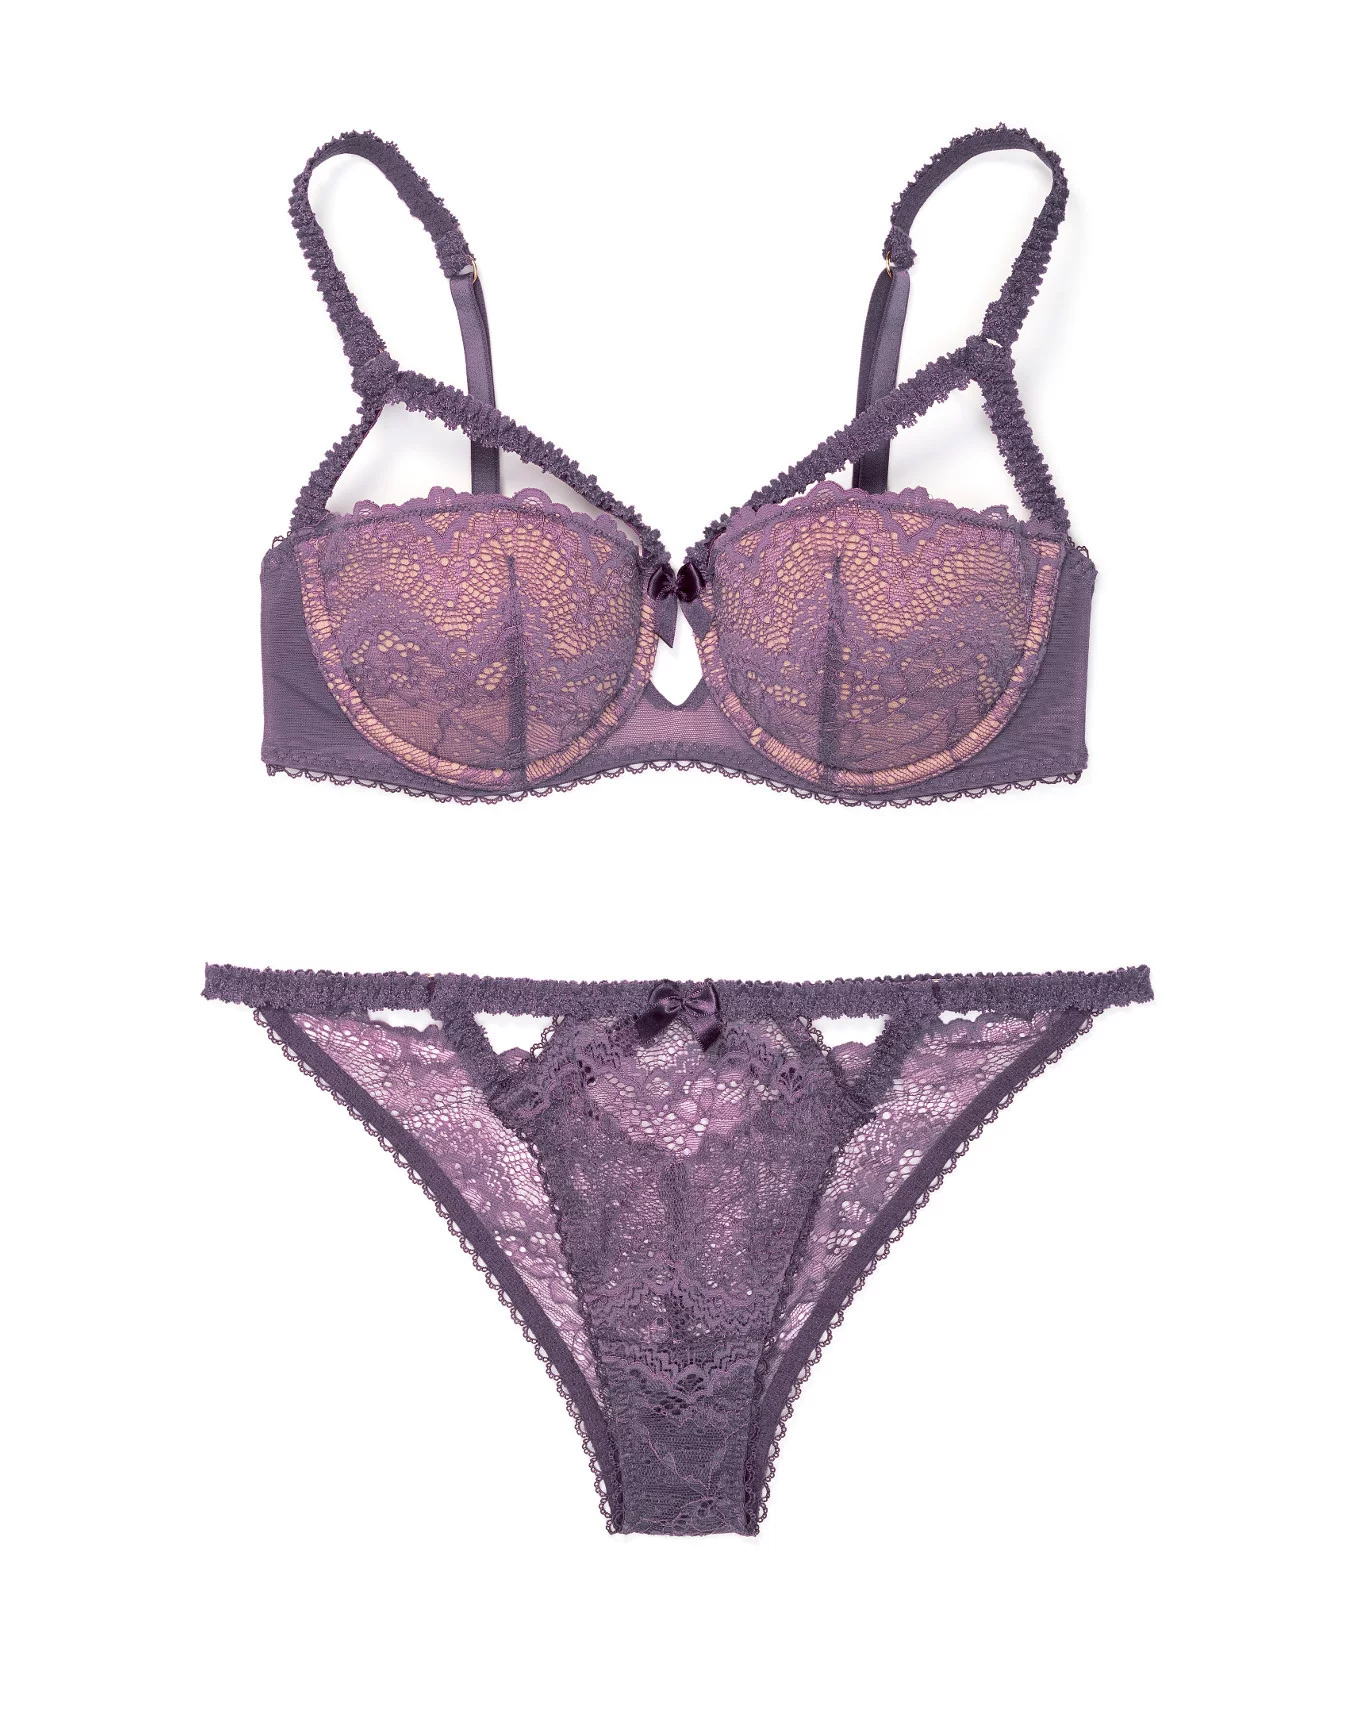 Buy Purple Satin Bra Panty Set Non-Padded Underwire Free Low Rise Panty  with Adjustable Straps Purple Floral Lace at